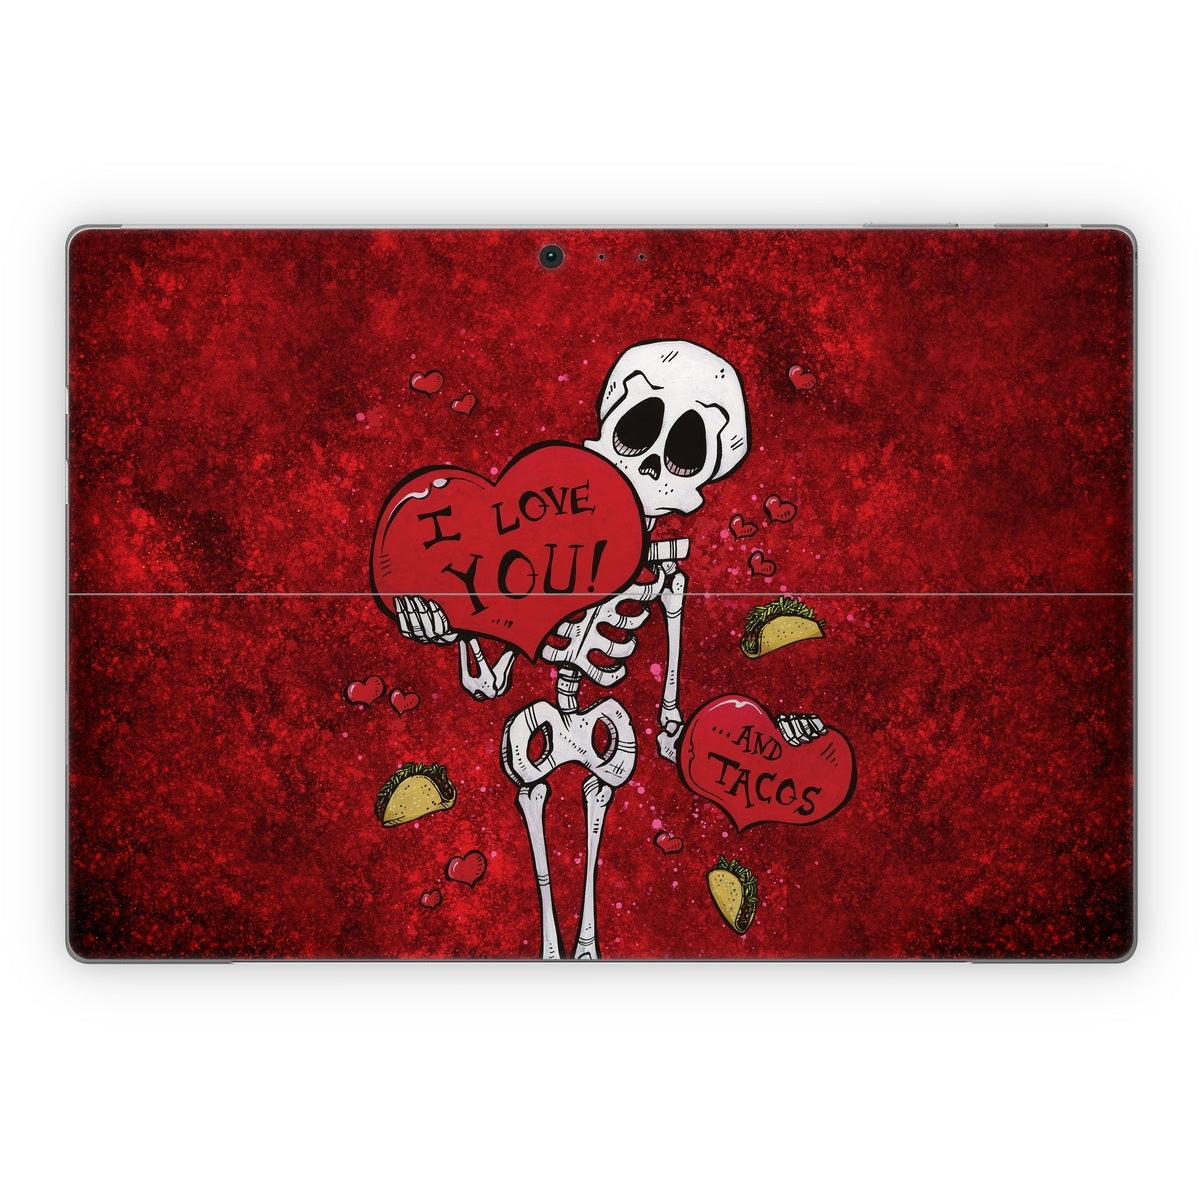 I Love You And Tacos - Microsoft Surface Pro Skin